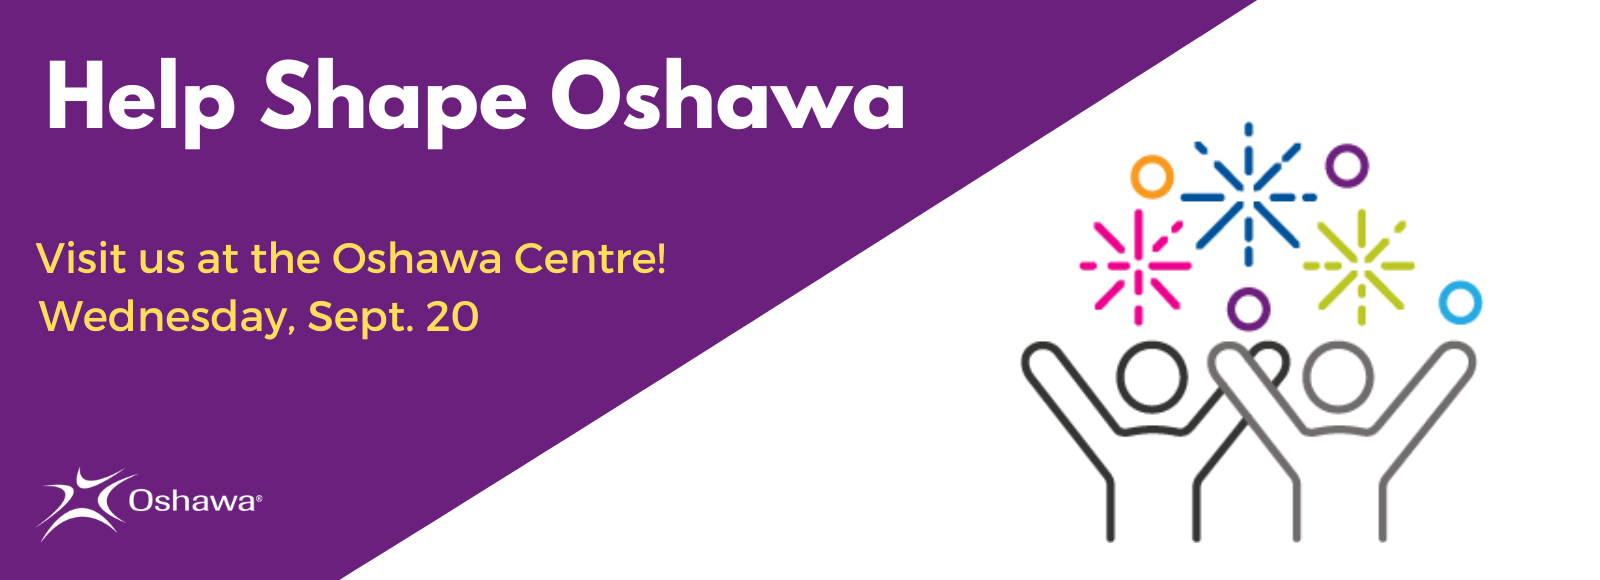 graphic of two people with arms raised and star bursts overhead with text that reads Help Shape Oshawa and the City logo mark below